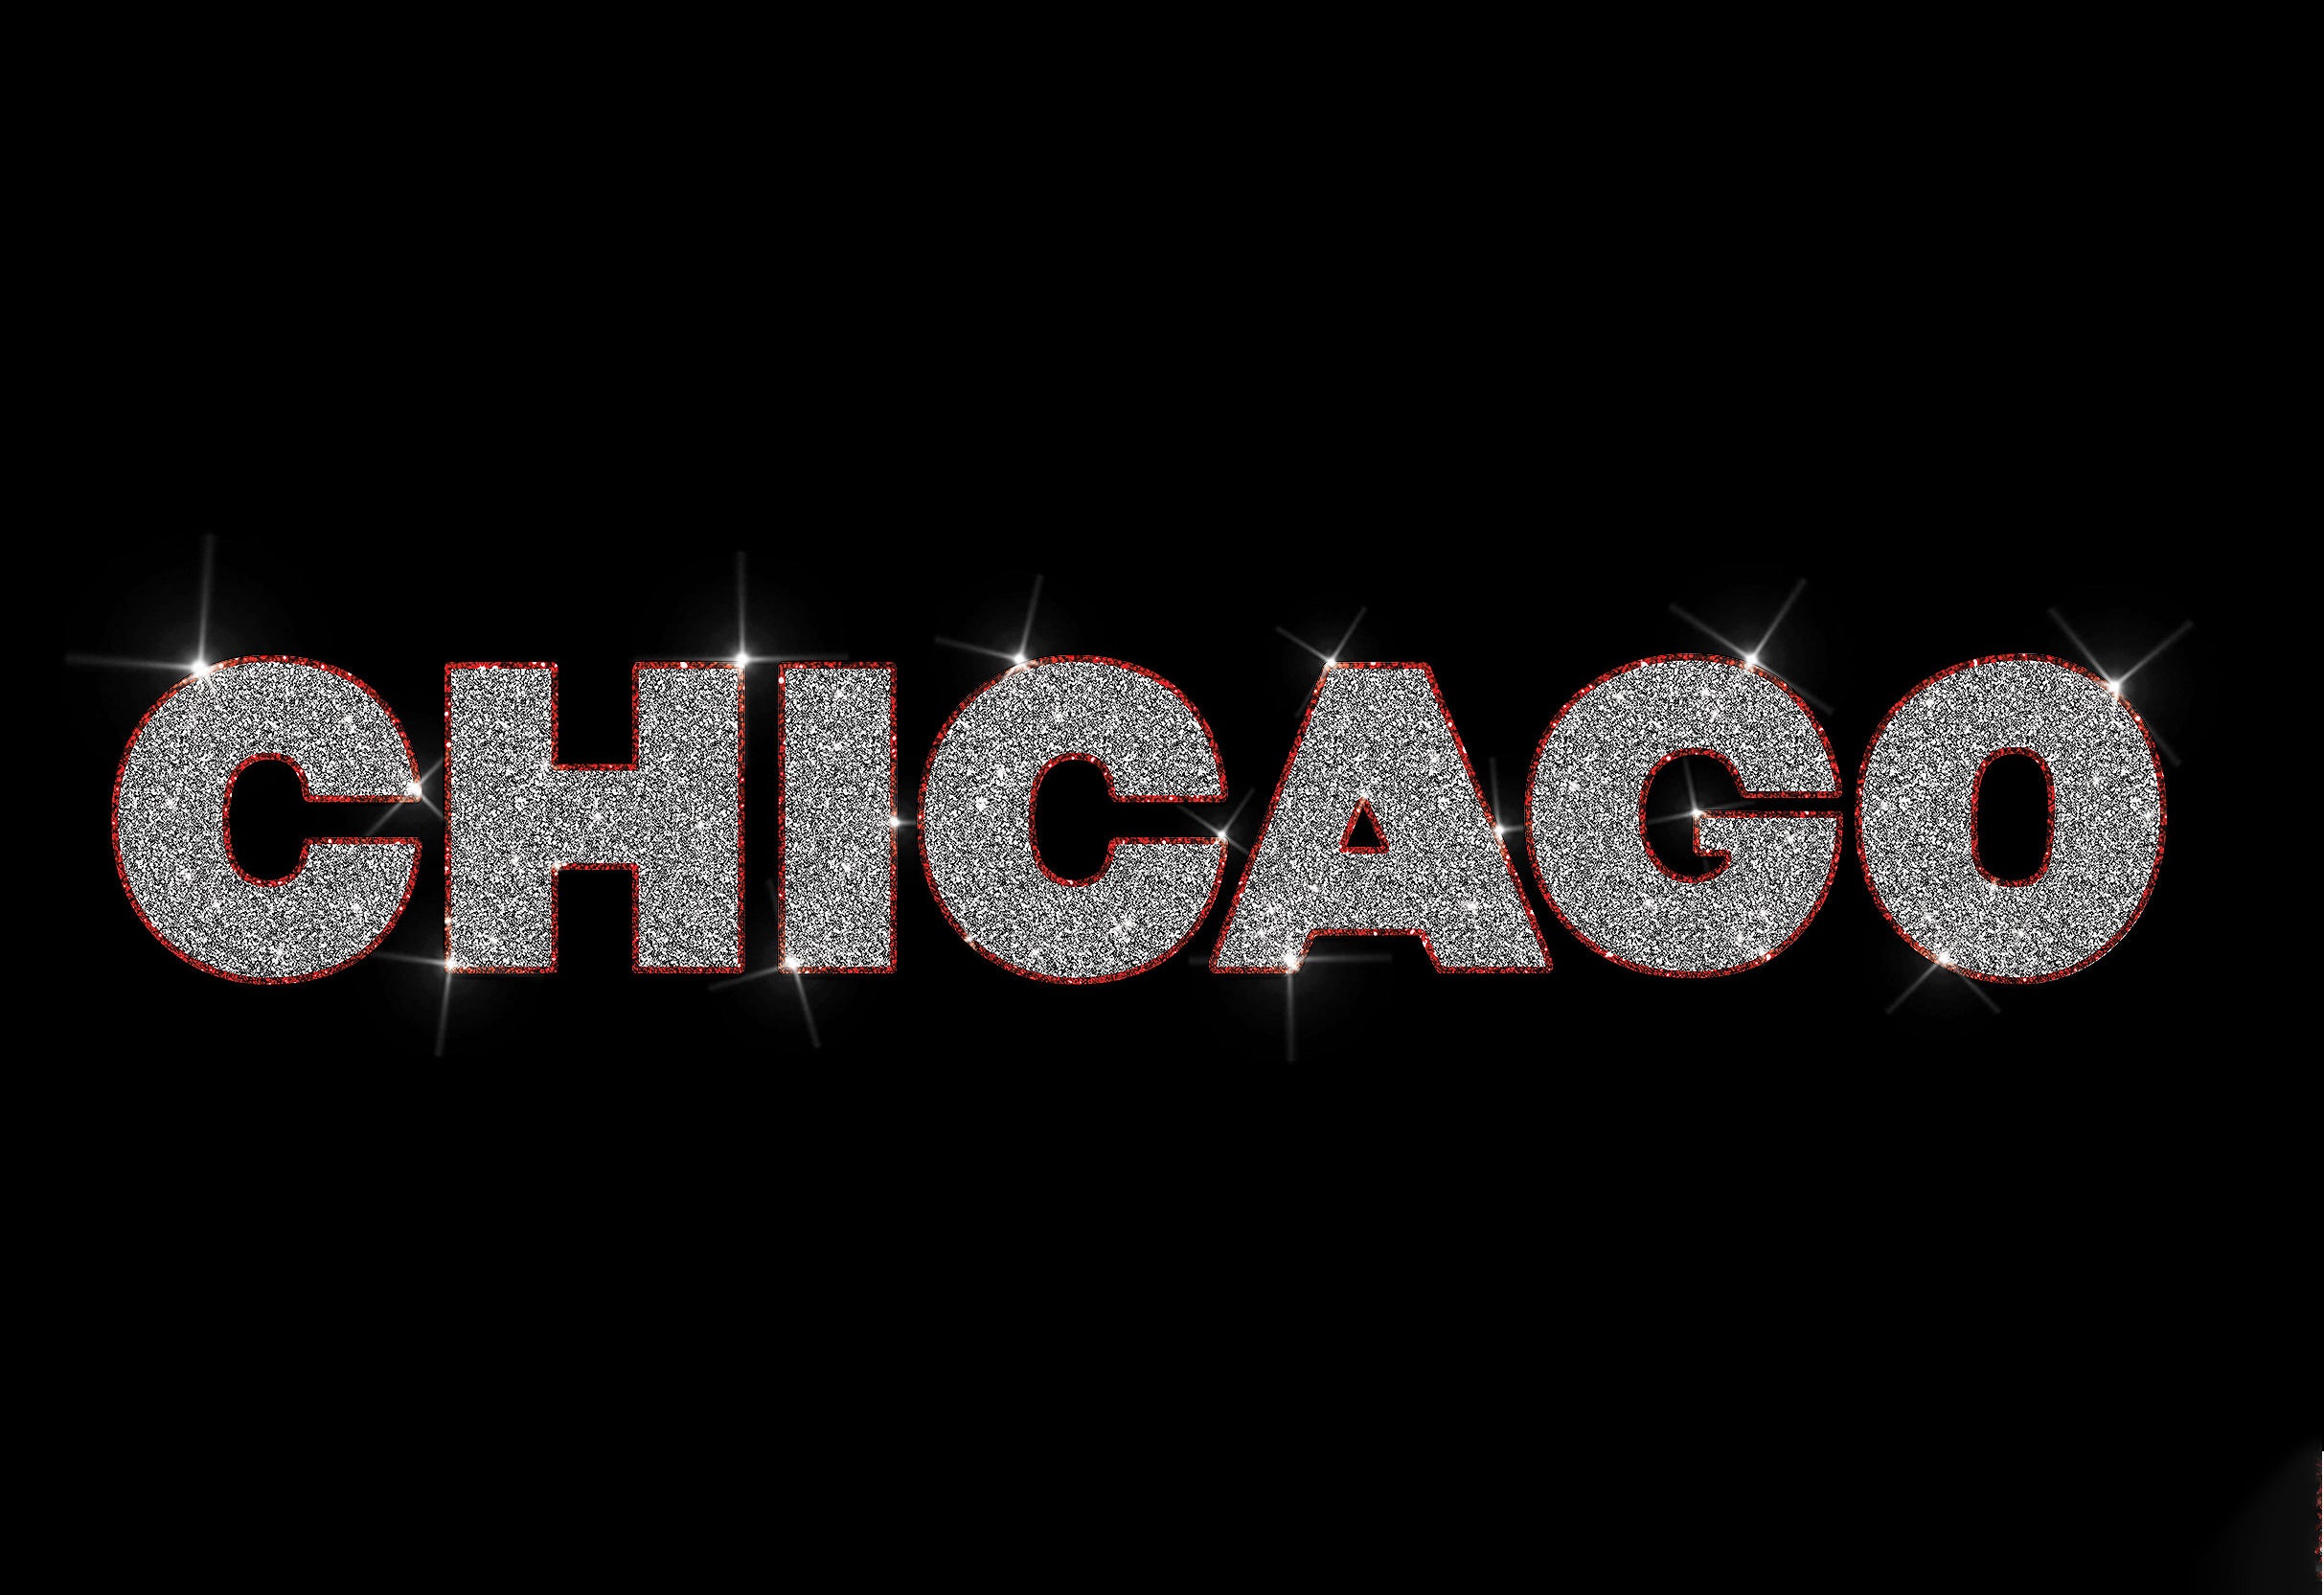 Main image for event titled Chicago the Musical (Touring)